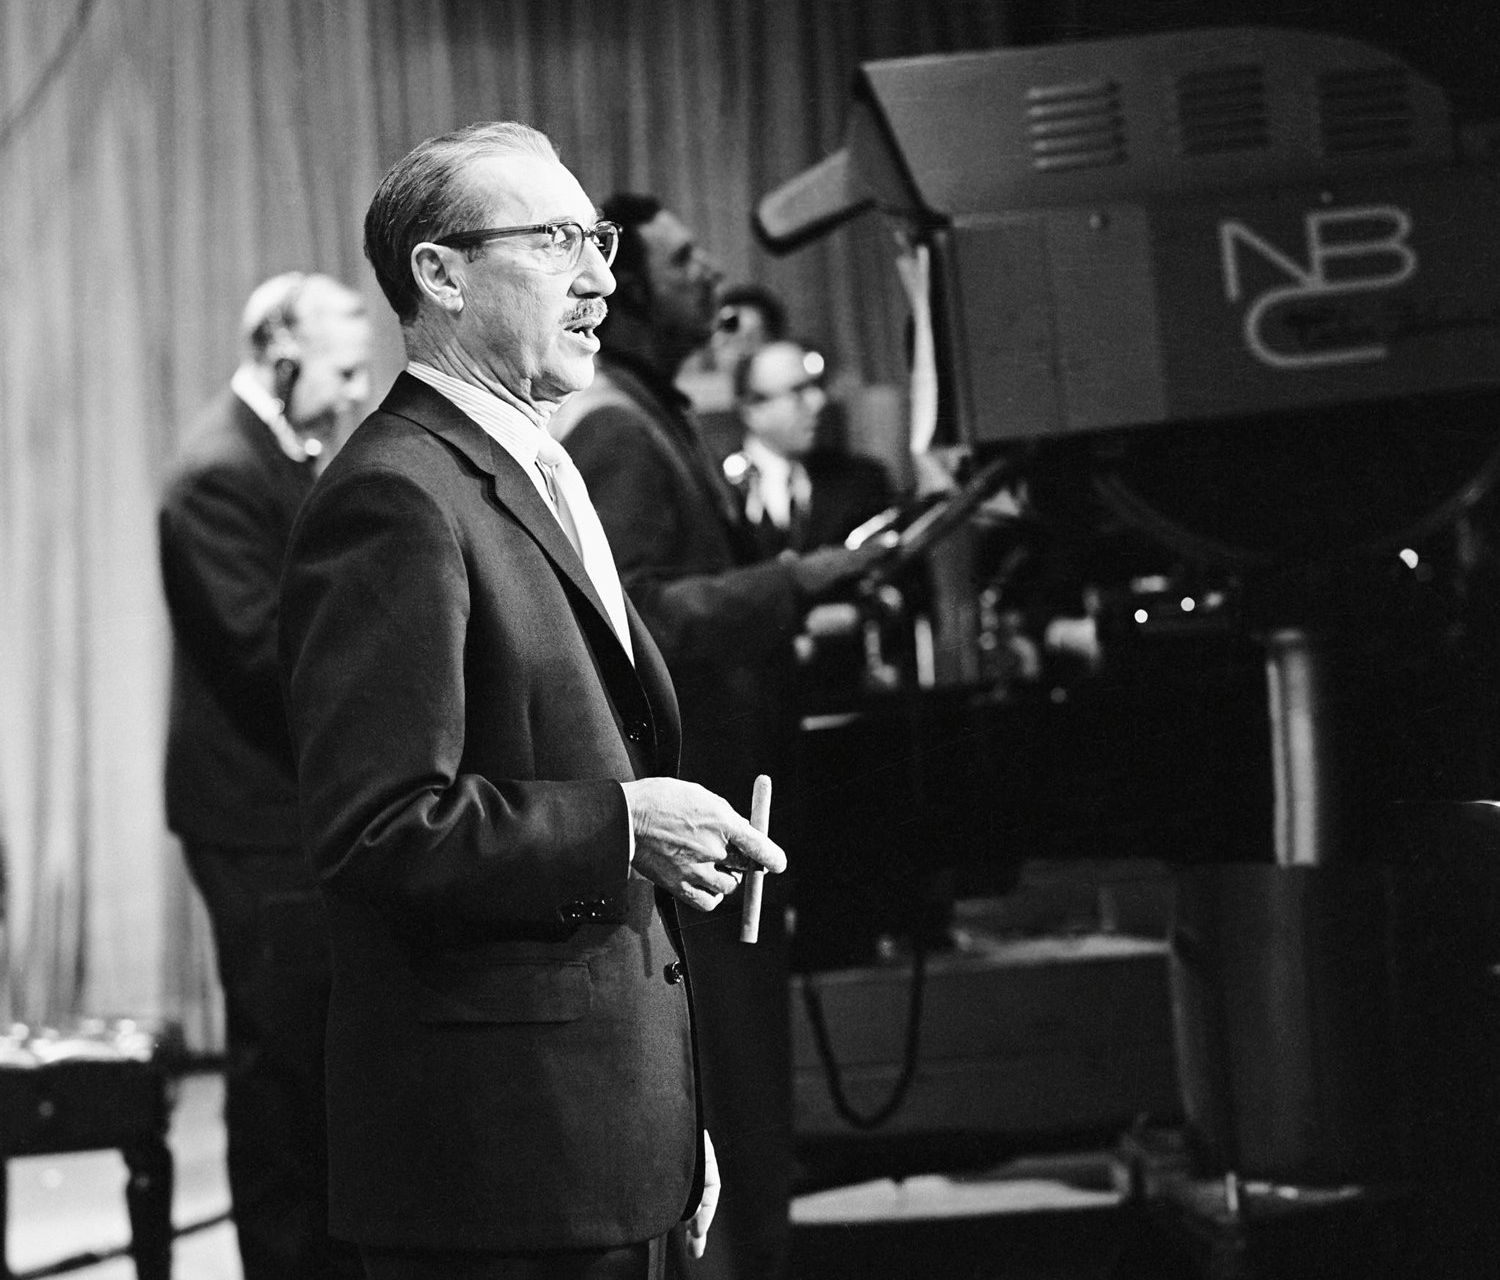 Groucho Marx hosts the Tonight Show in 1962.